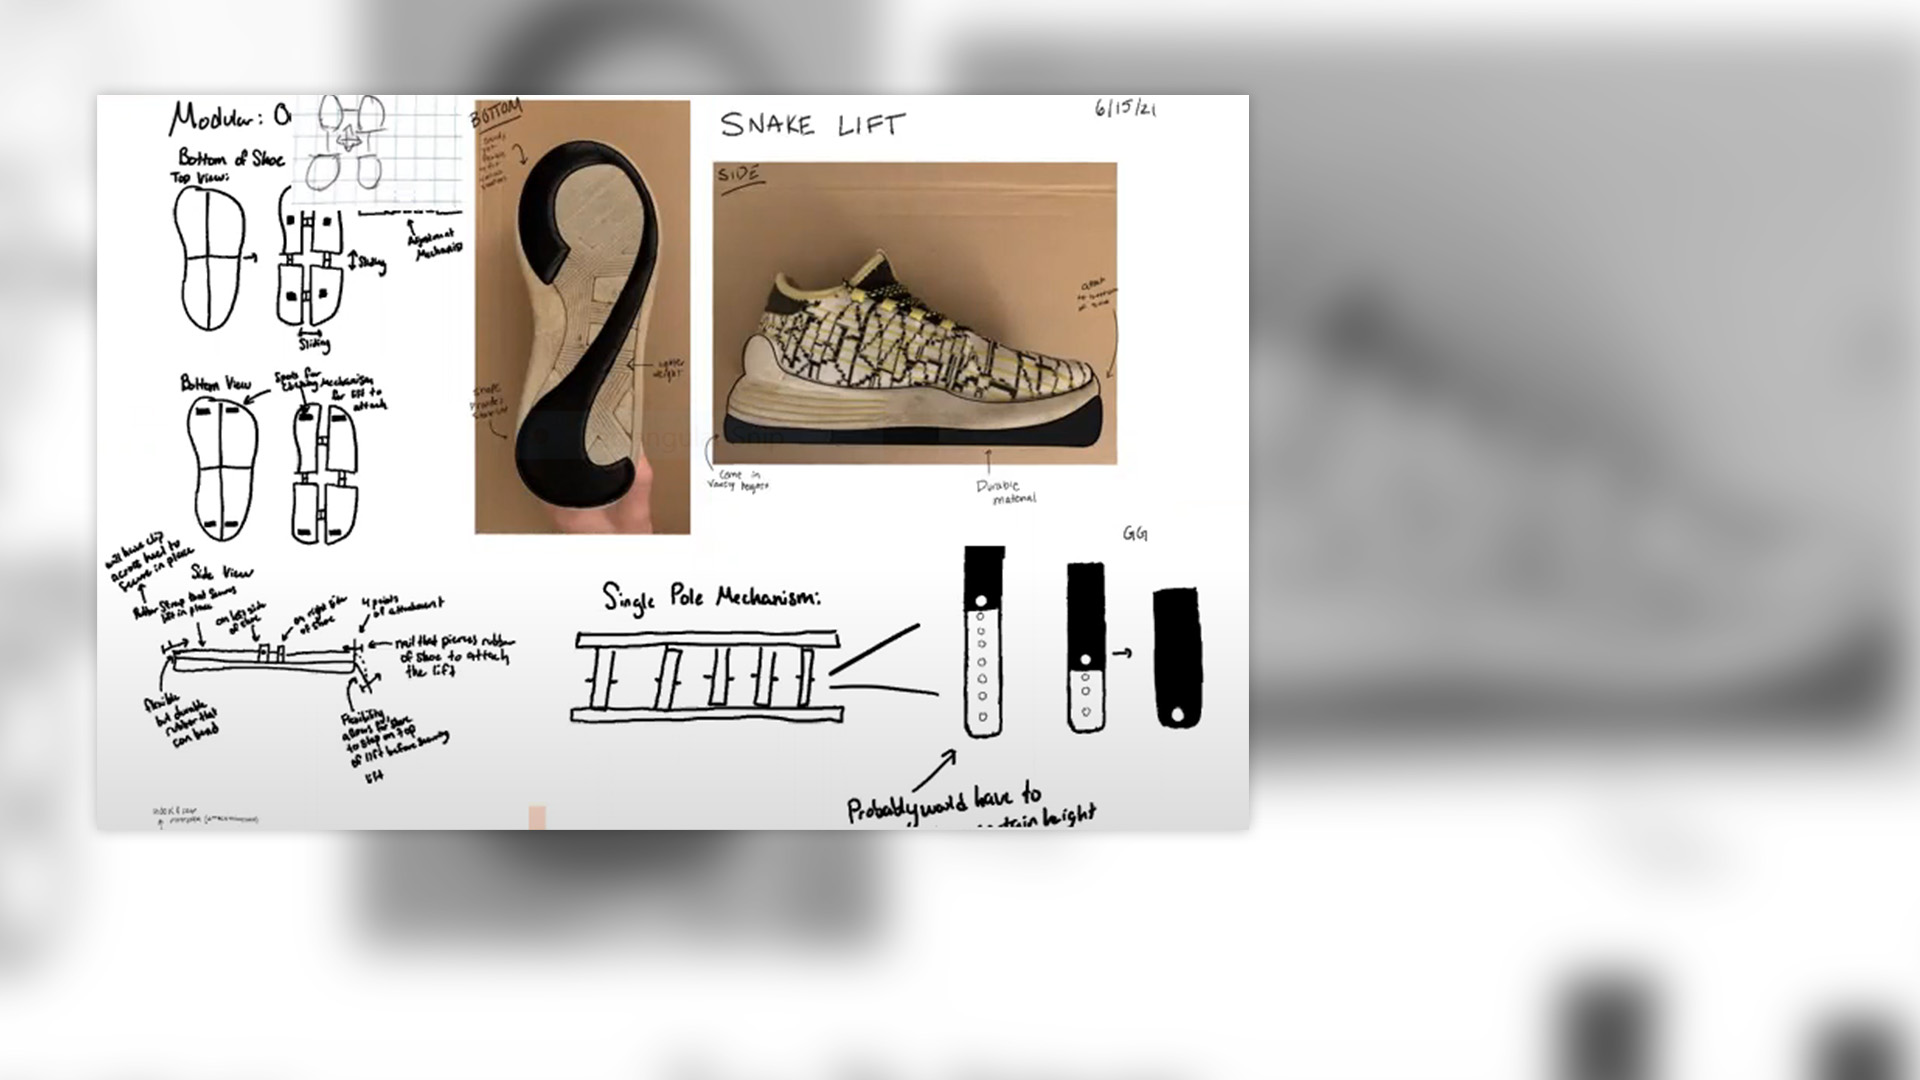 Team Soleia design sketches, including hand-drawn diagrams of the shoe lifts and pole mechanisms as well as photos of an actual shoe sole and profile.